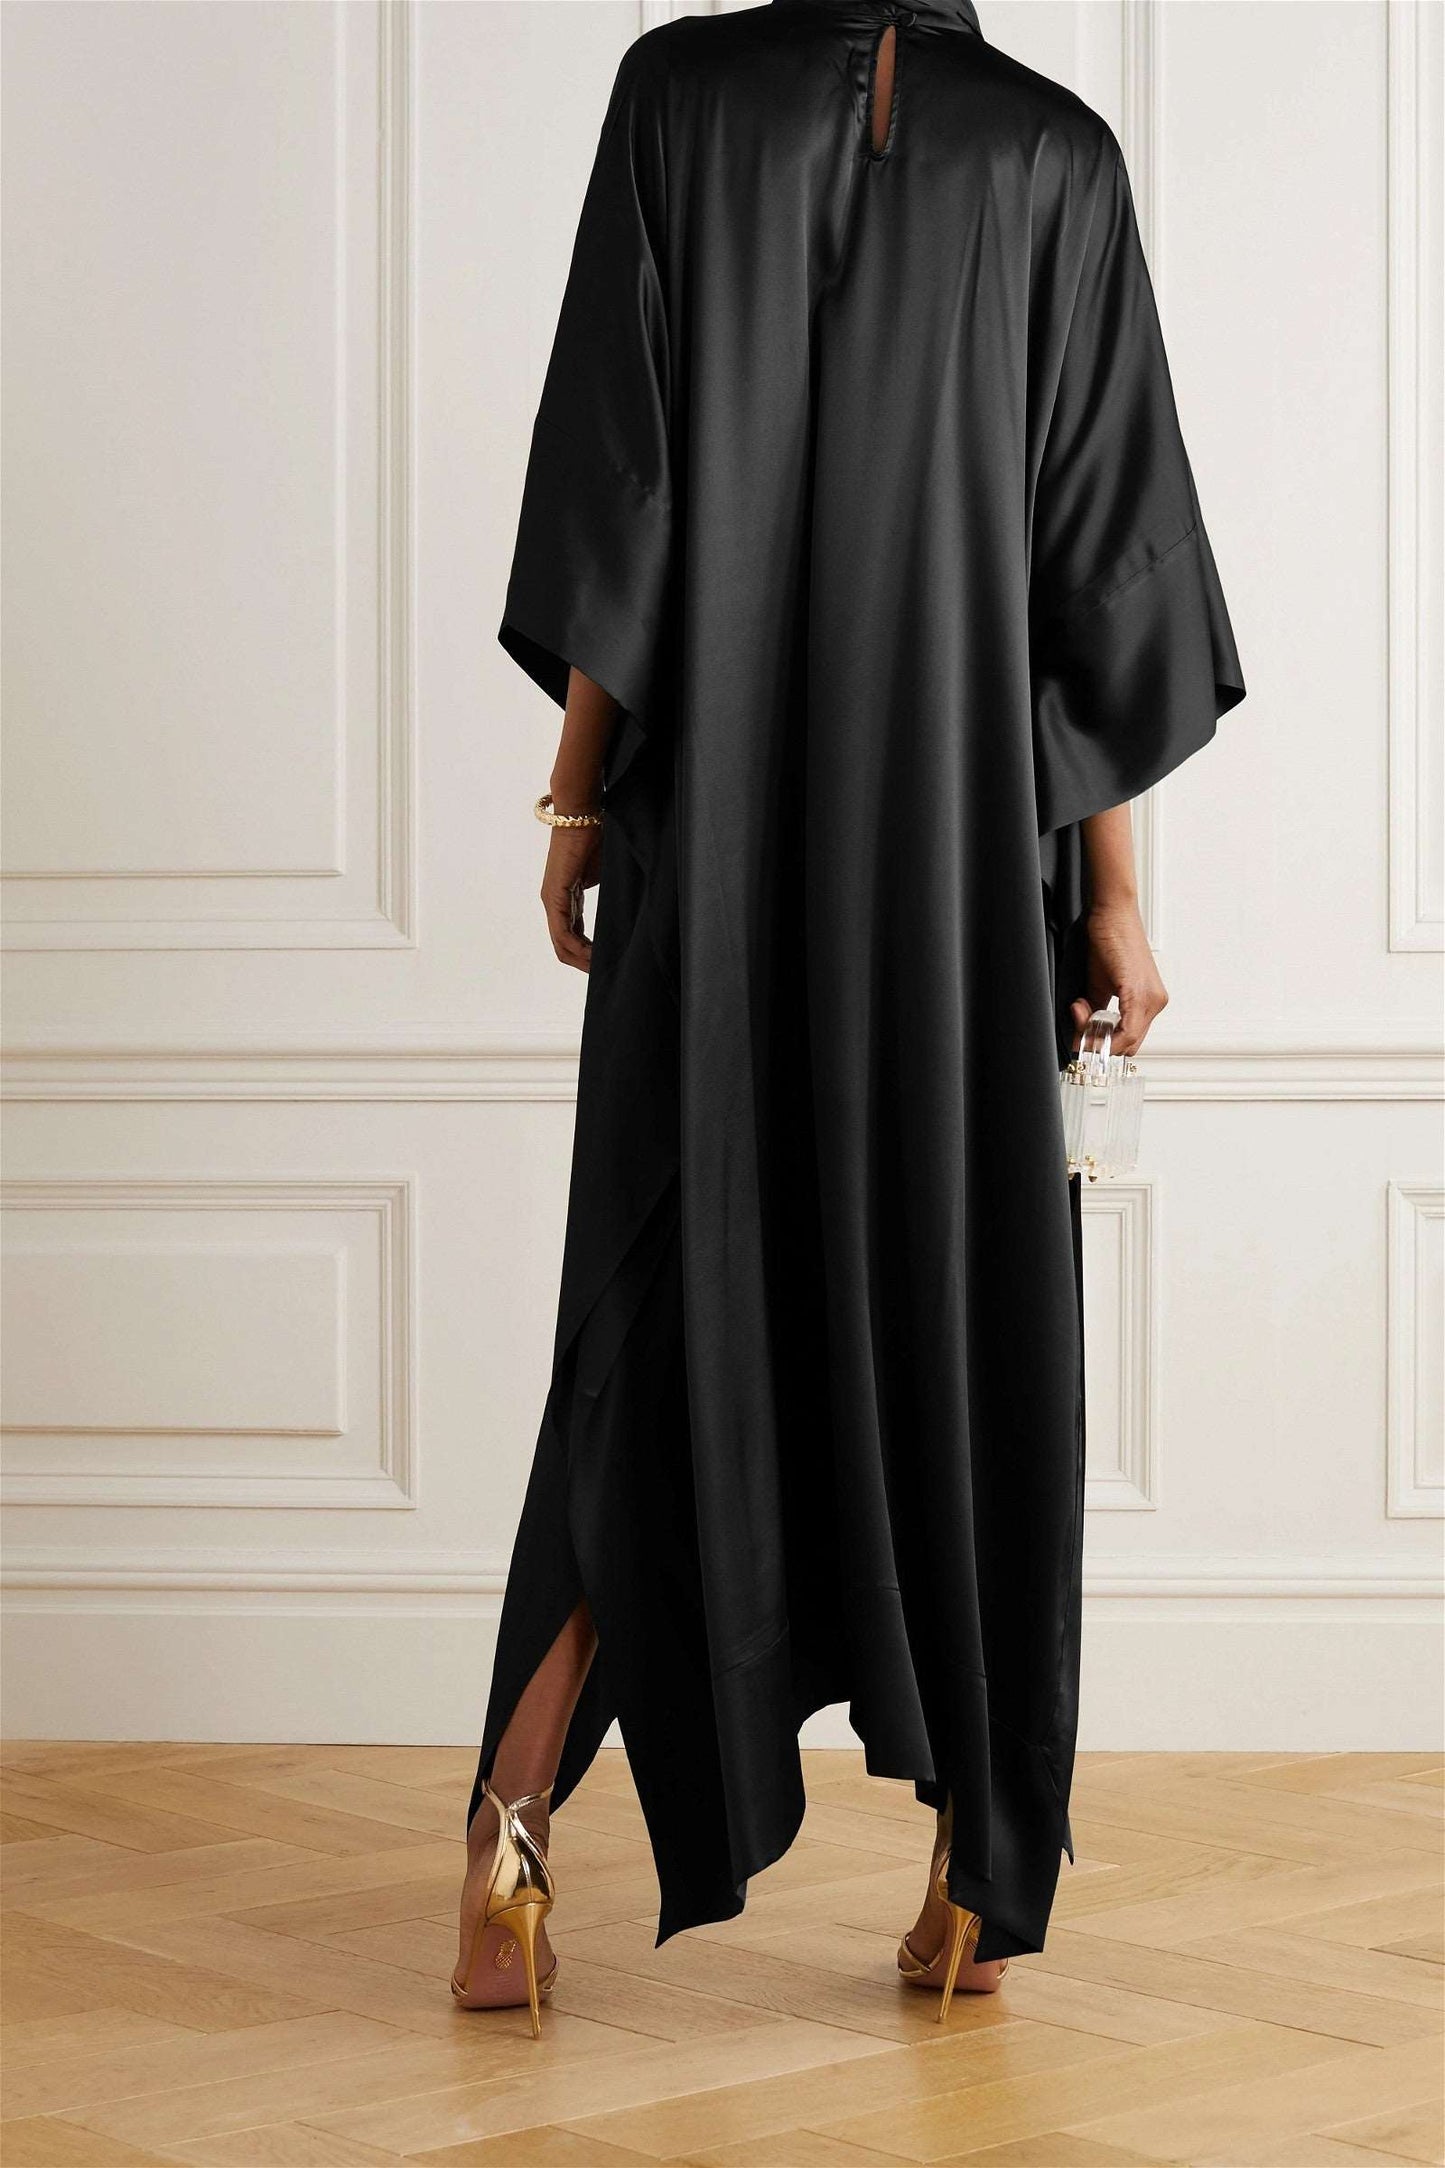 The model in the image is wearing Amazing Heavy Designer Party Wear Kaftan from Alice Milan. Crafted with the finest materials and impeccable attention to detail, the Dress looks premium, trendy, luxurious and offers unparalleled comfort. It’s a perfect clothing option for loungewear, resort wear, party wear or for an airport look. The woman in the image looks happy, and confident with her style statement putting a happy smile on her face.